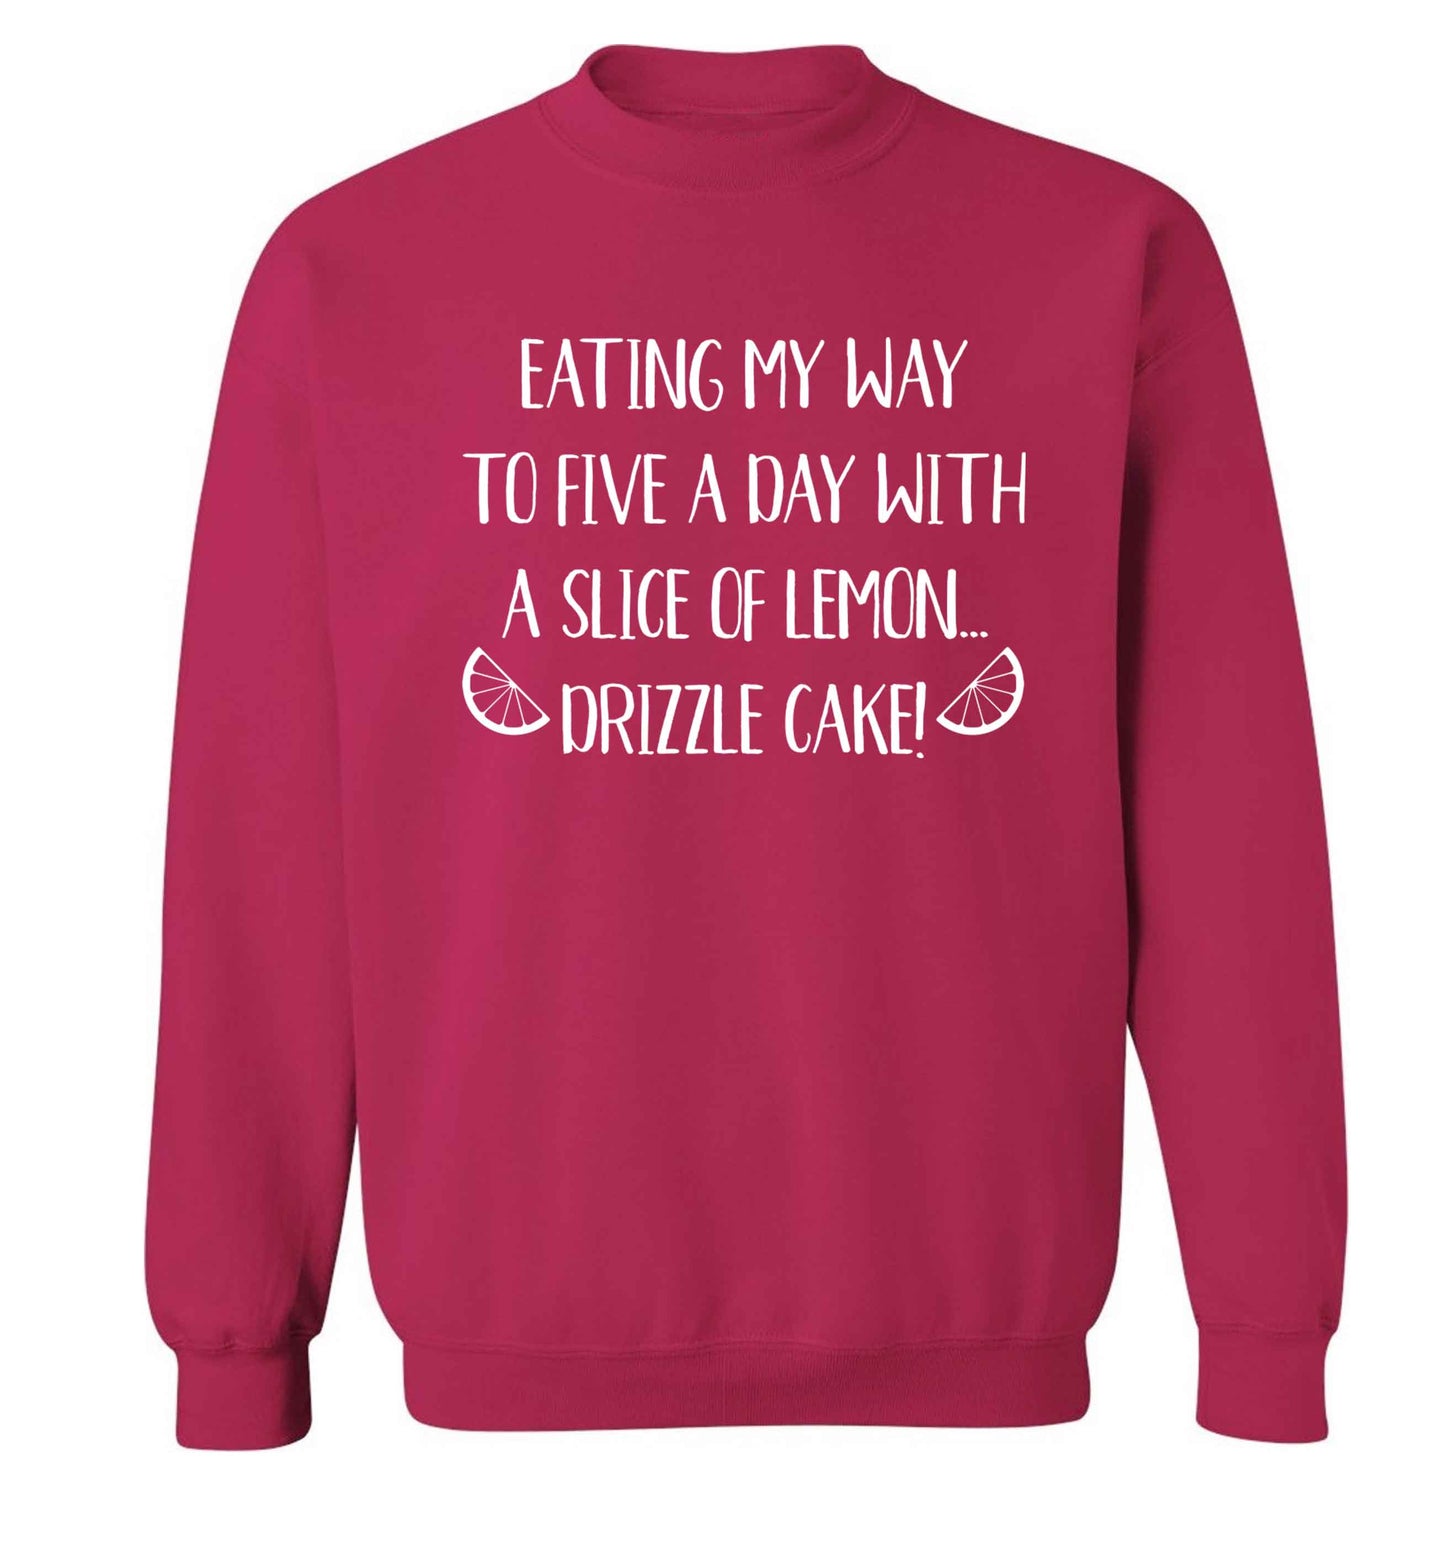 Eating my way to five a day with a slice of lemon drizzle cake day Adult's unisex pink Sweater 2XL